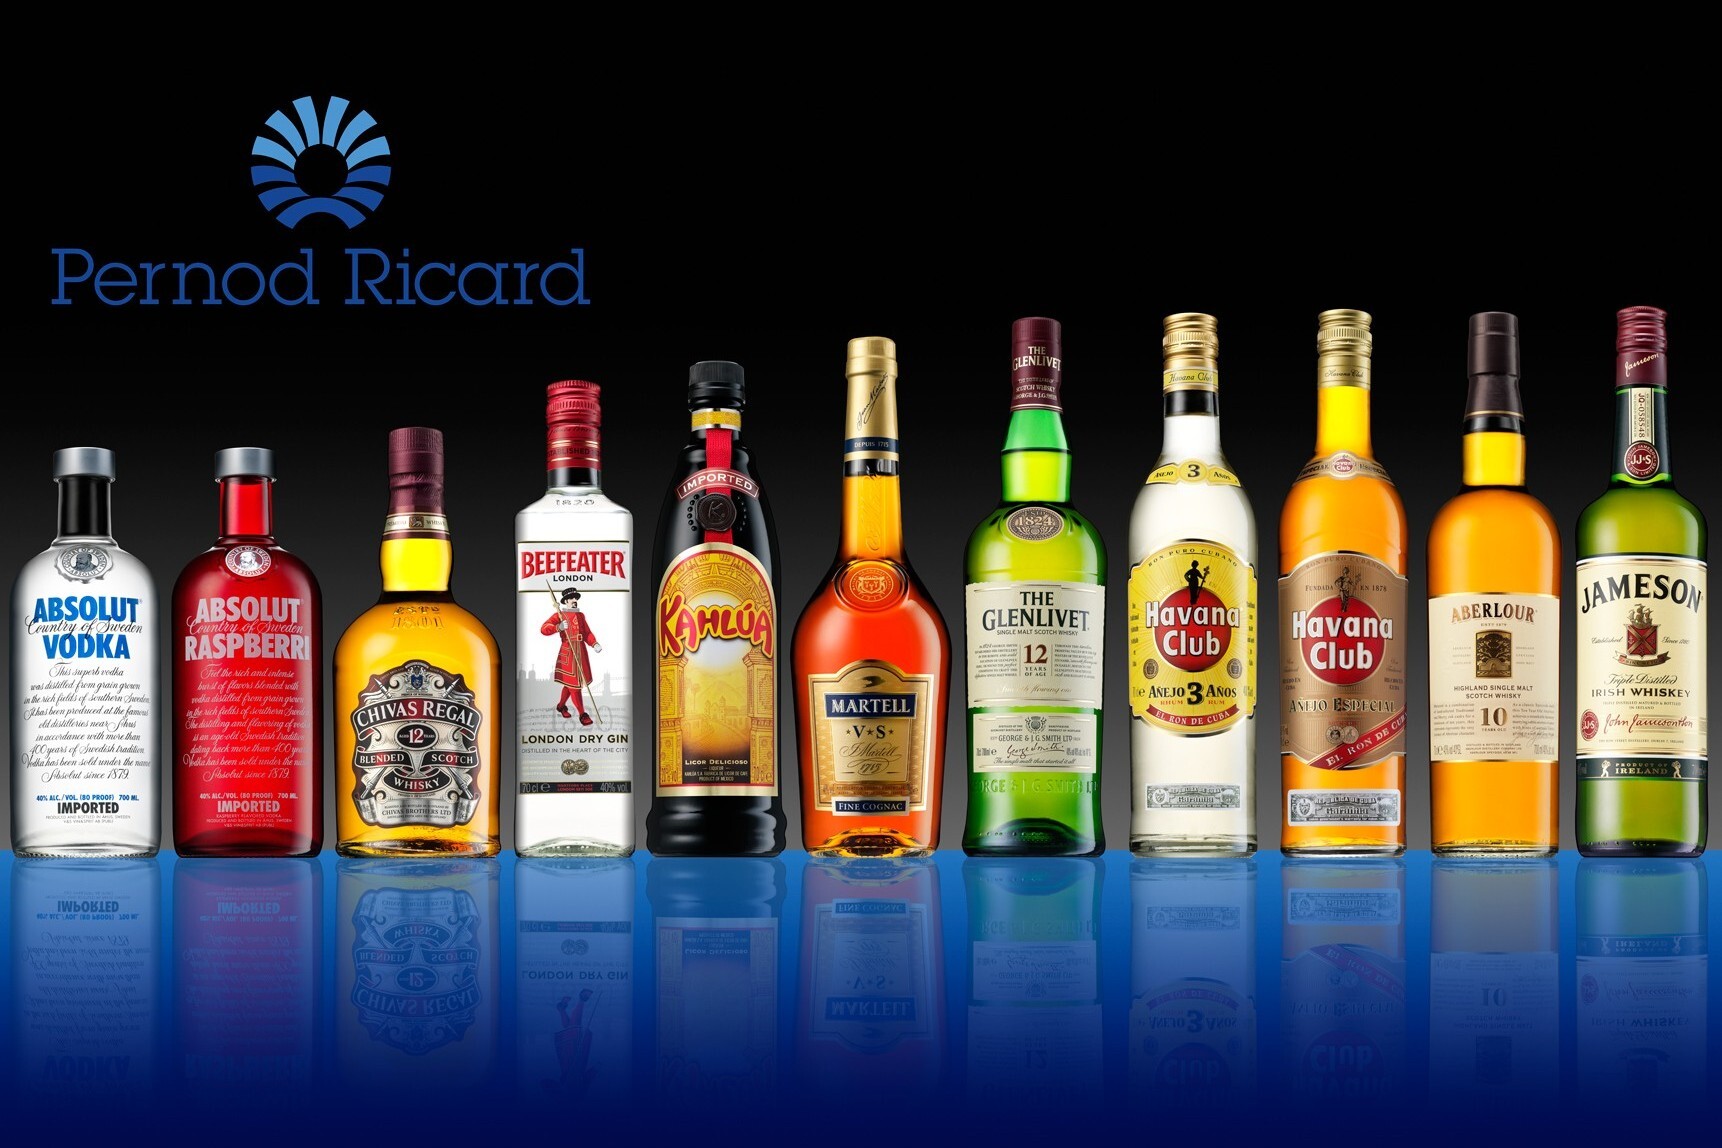 Pernod Ricard Hits 'Record' Sales in China, Exceeds Pre-pandemic Performance